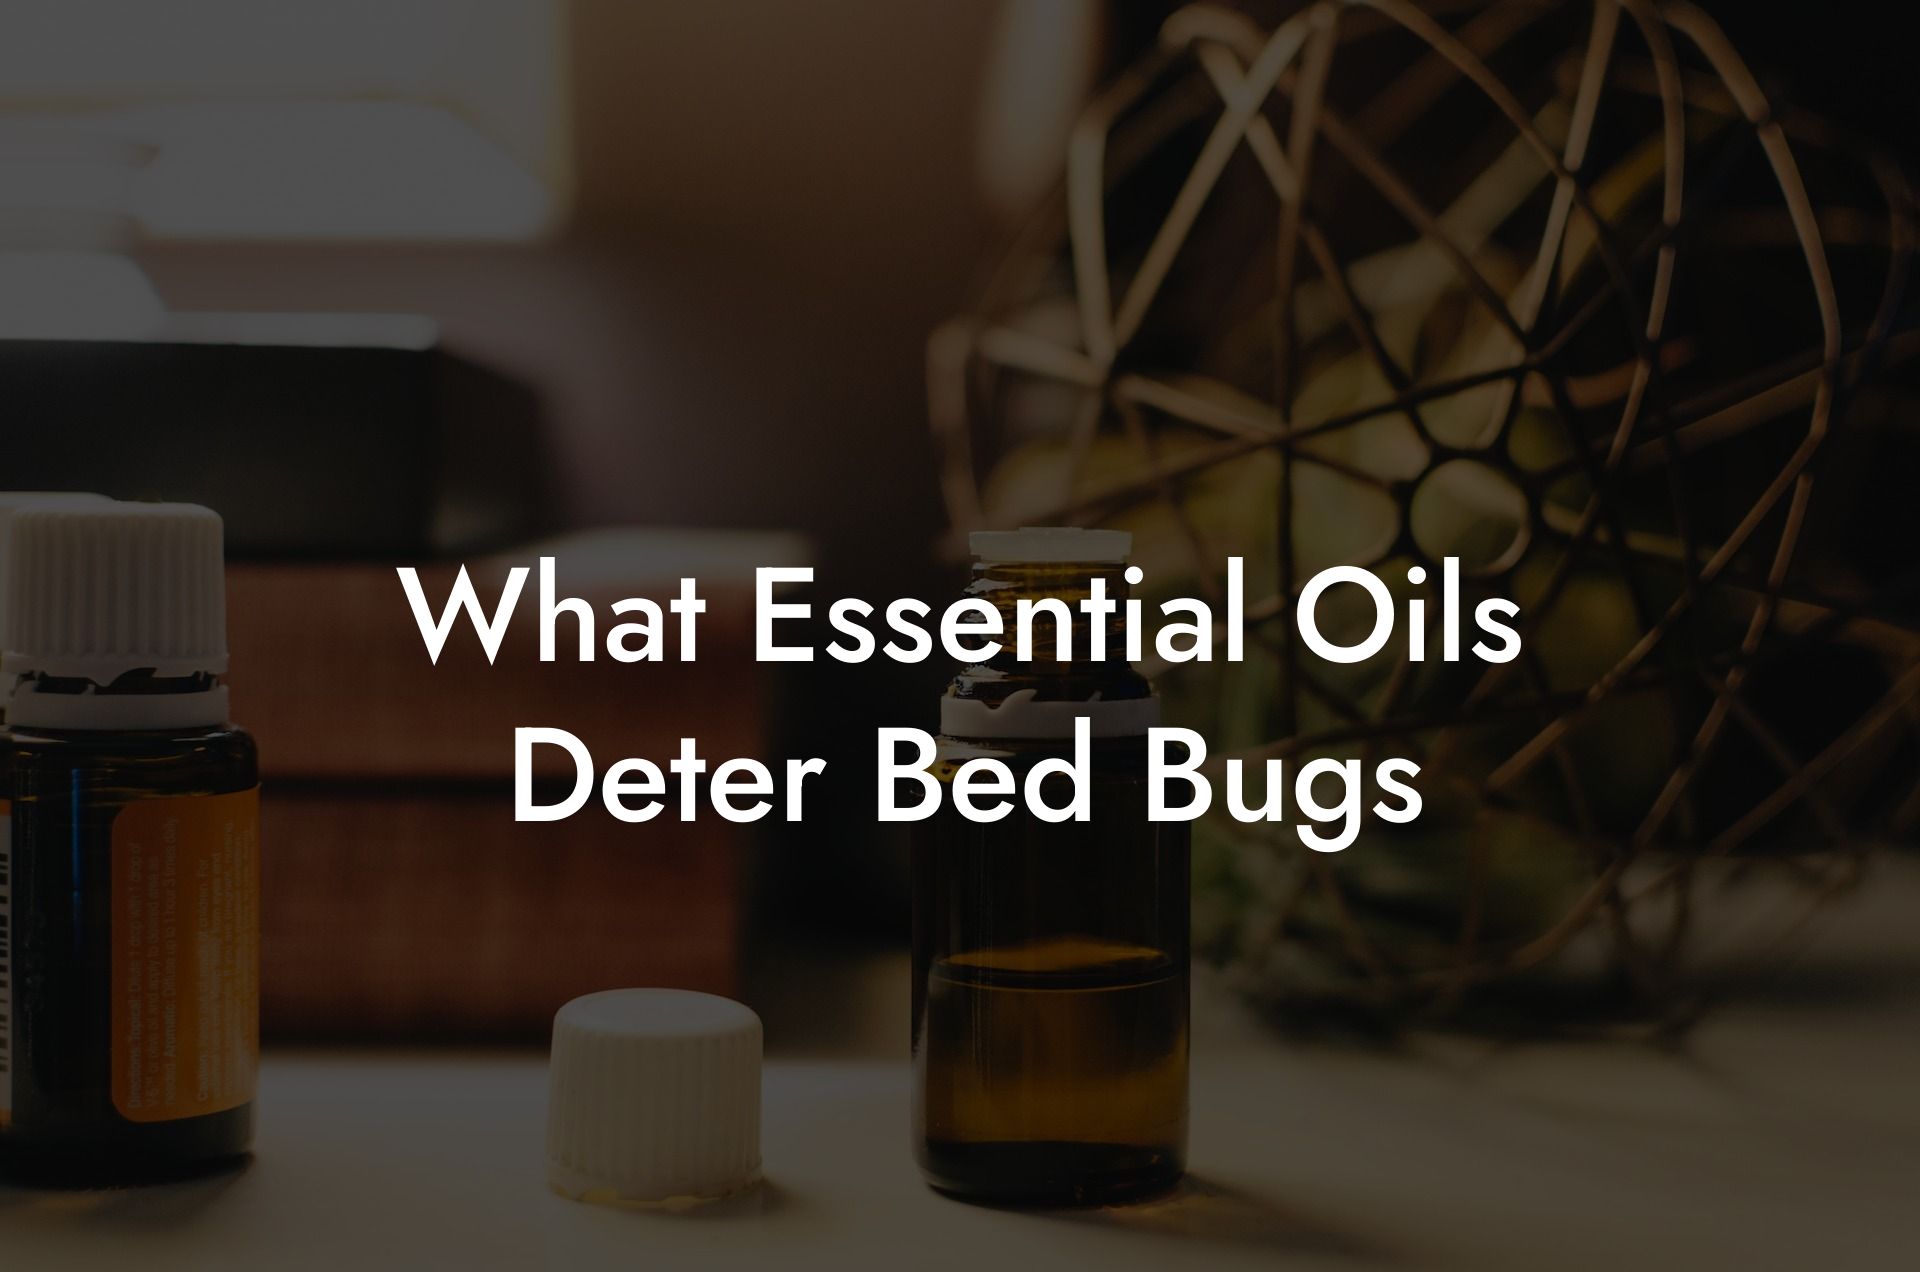 What Essential Oils Deter Bed Bugs